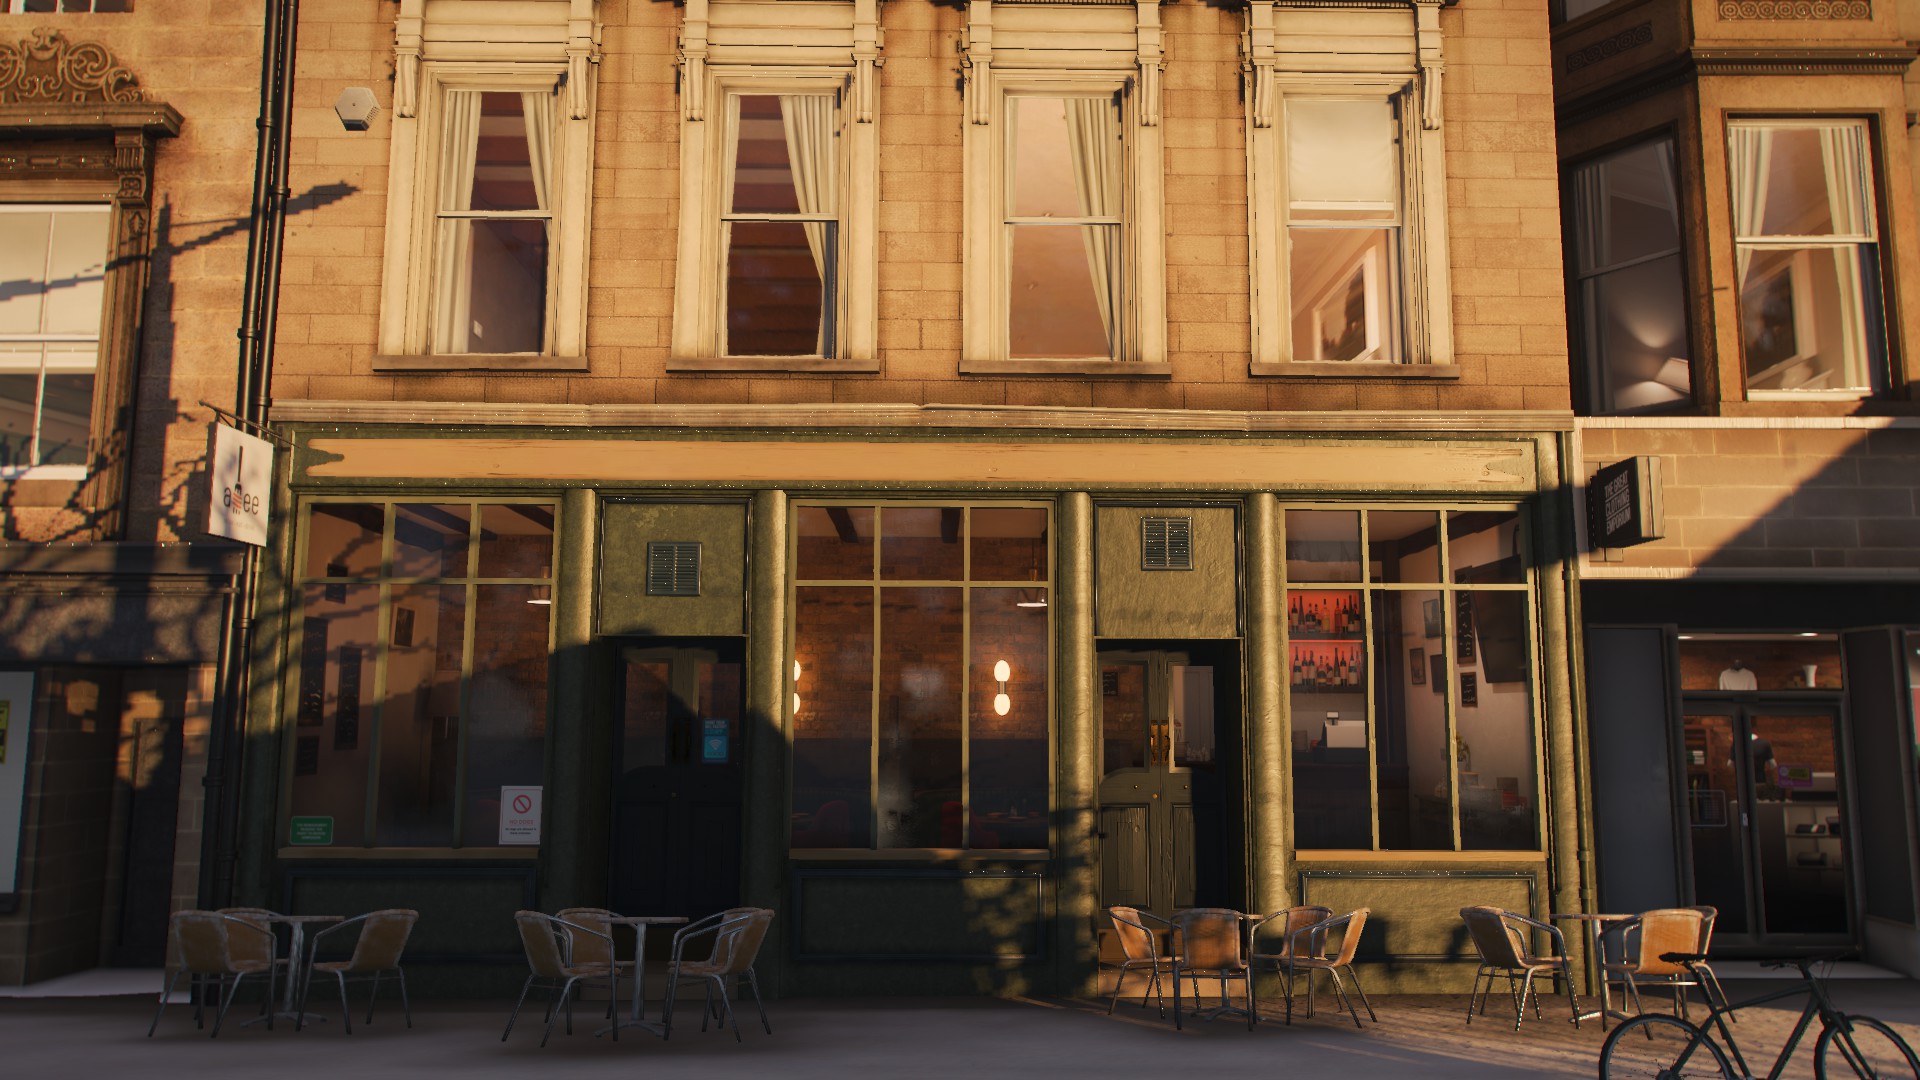 Forza Horizon 4 Town Video Games Building Chair Table Sunlight Video Game Art CGi Store Front Window 1920x1080